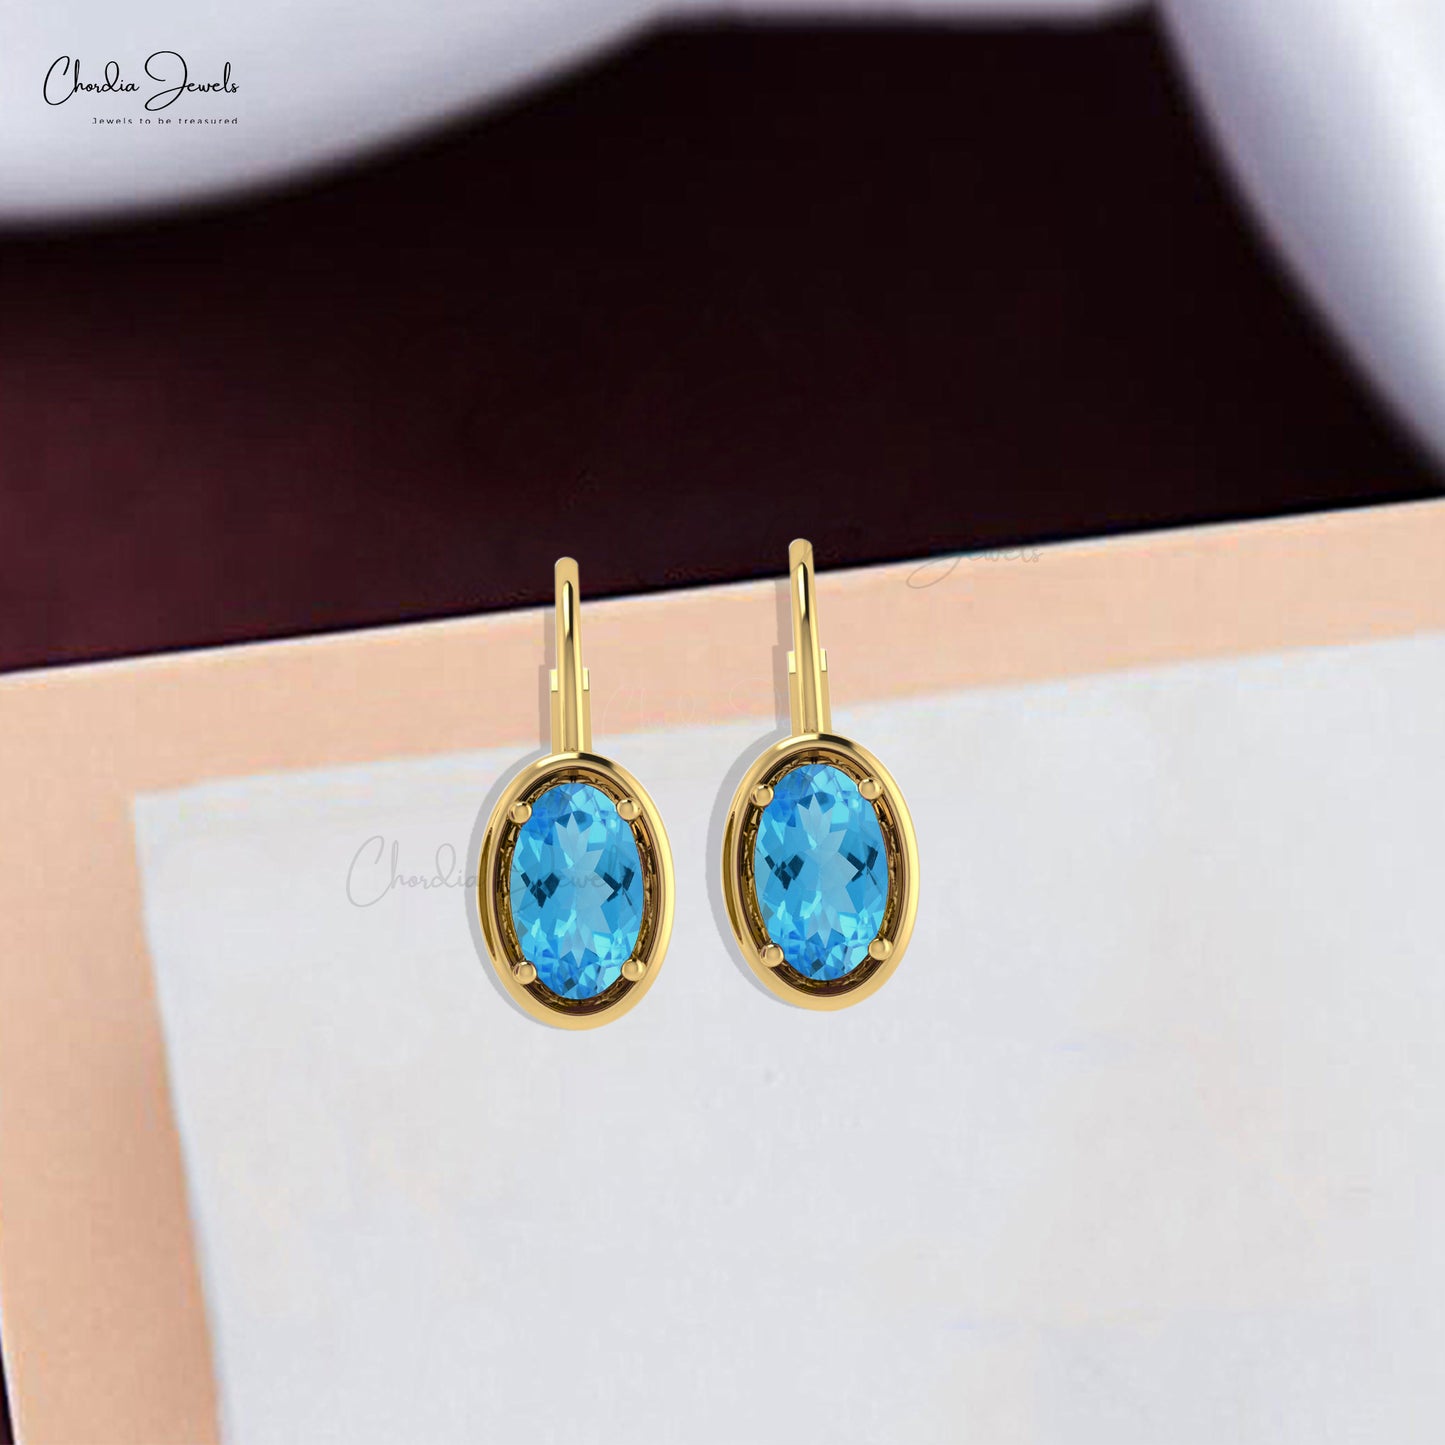 Genuine Swiss Blue Topaz Minimal Earrings 7x5mm Oval Gemstone Lever Back Earrings 14k Real Gold Antique Style Jewelry For Bridal